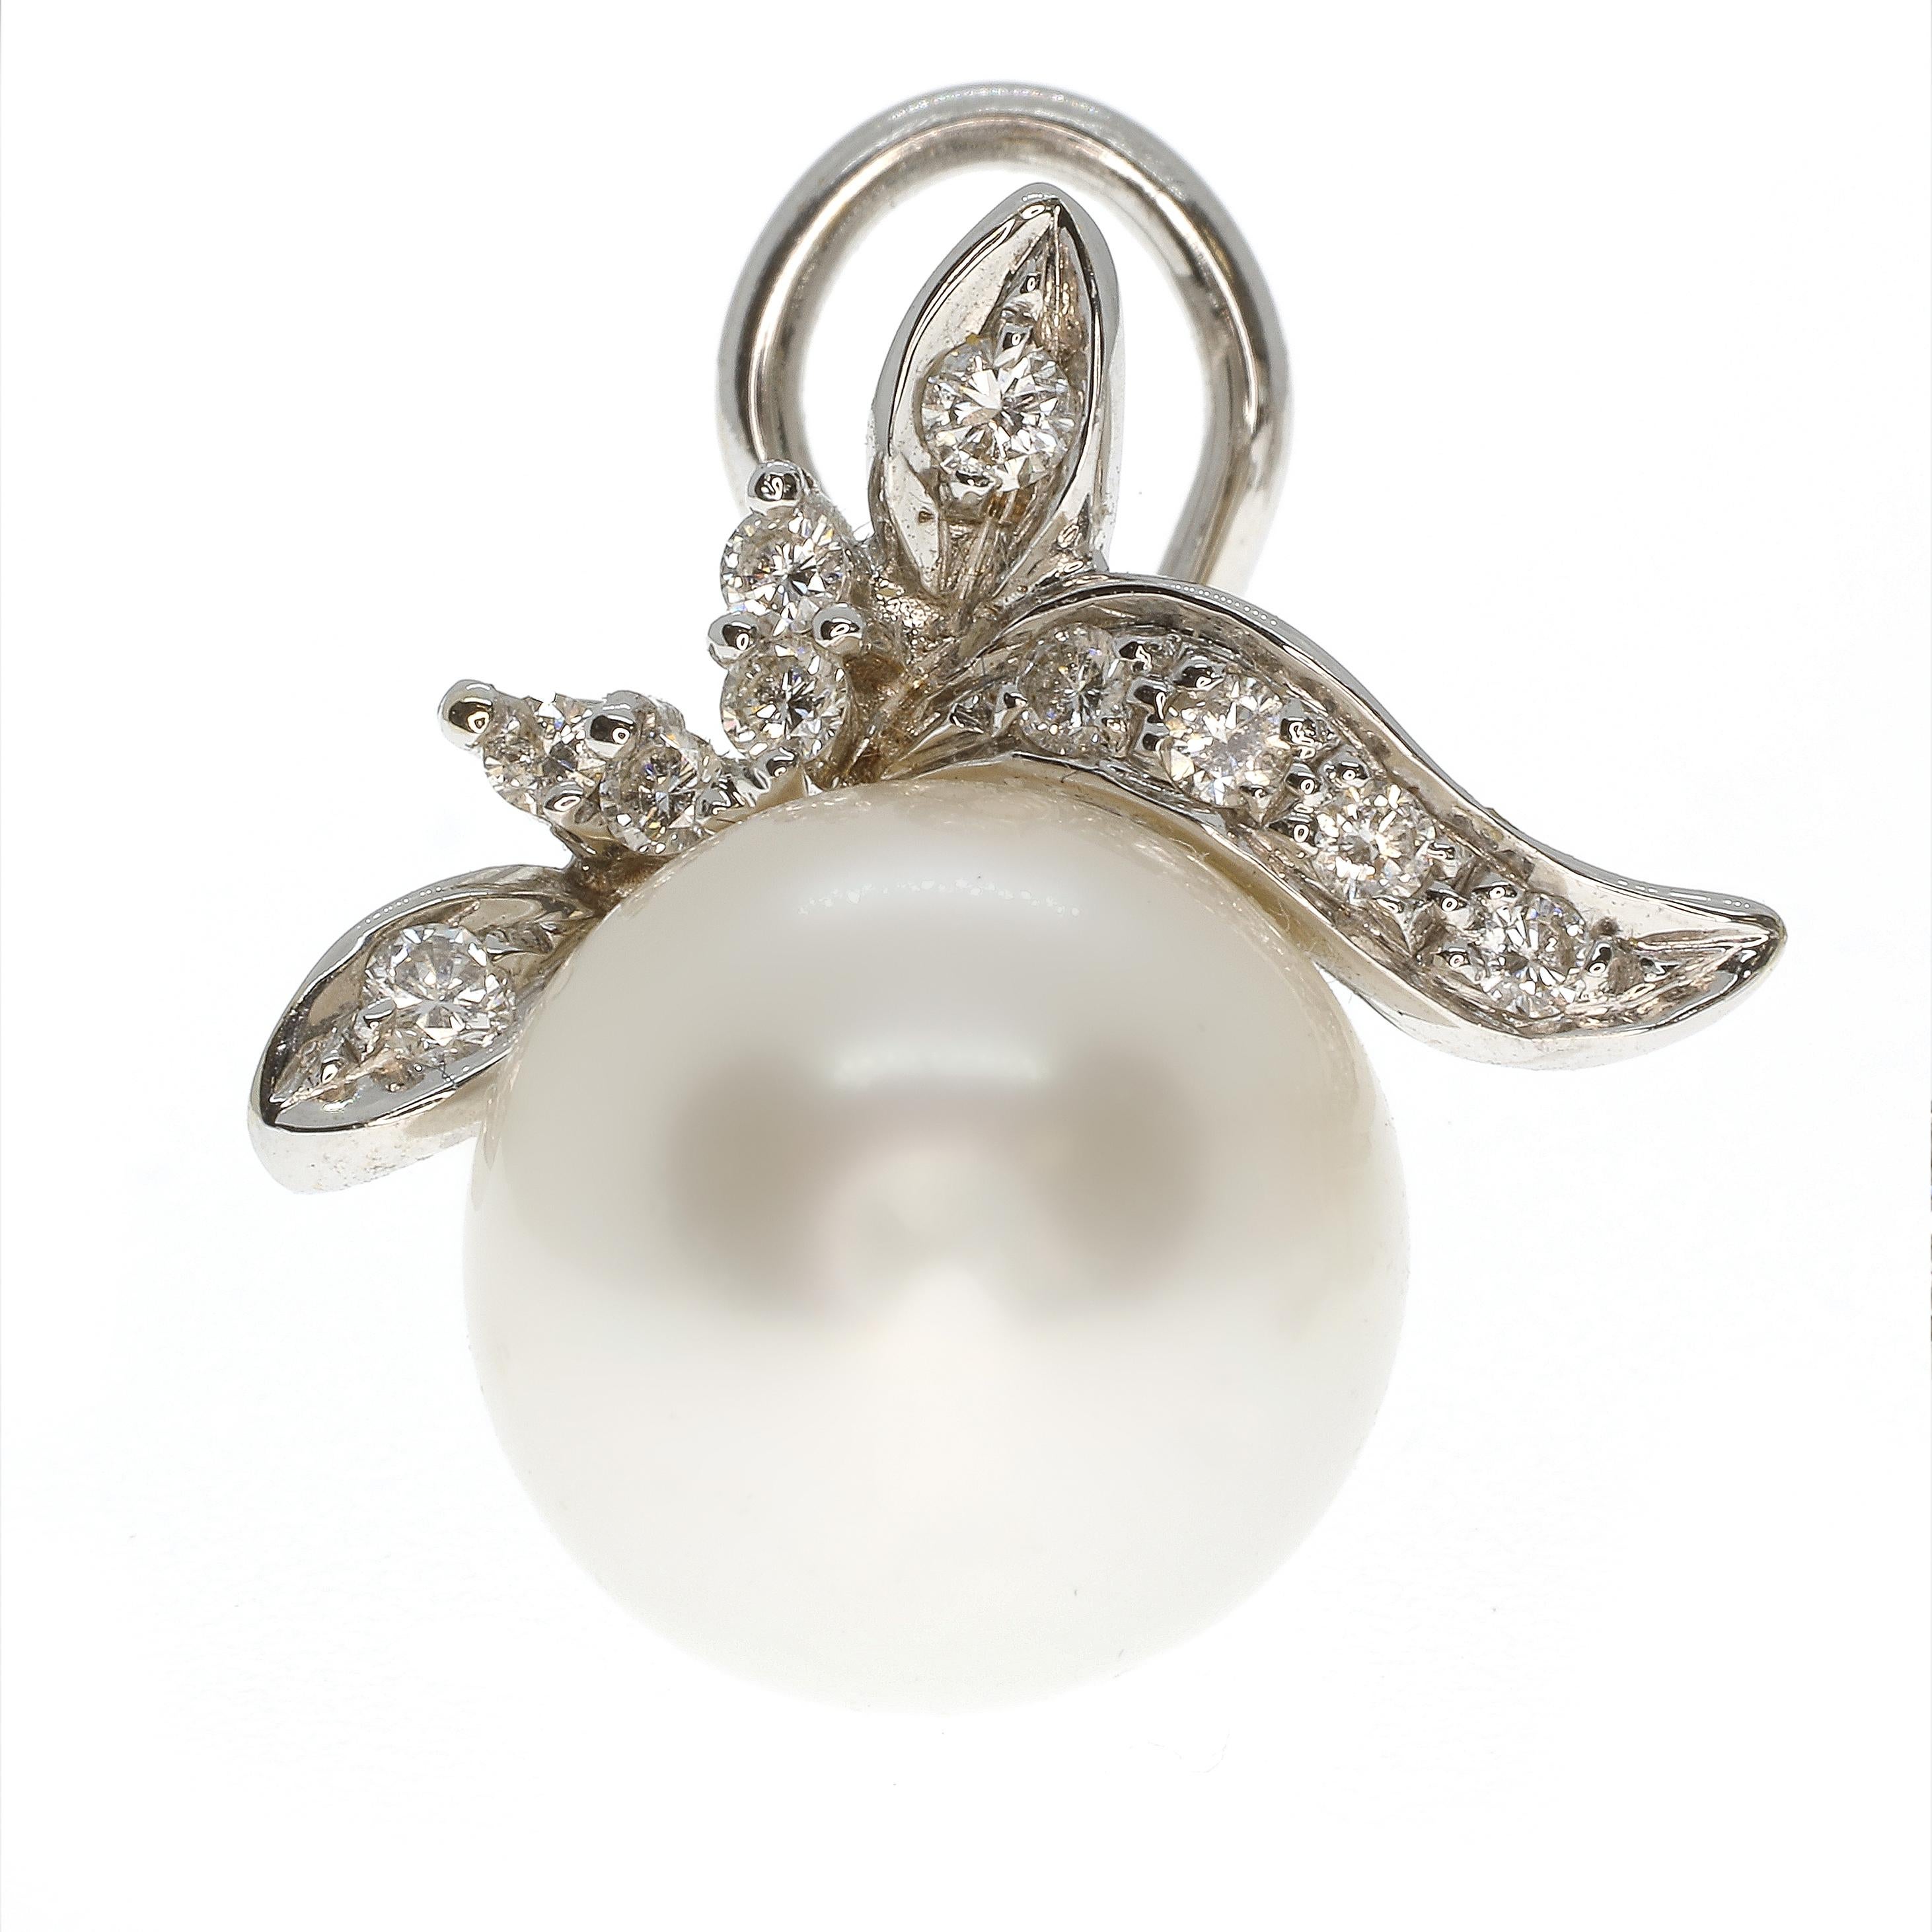 A pair of Australian pearls weighing 27.82 carats and 12.5mm across are set into a delicate design of 18-karat white gold set with 0.50 carats of white diamonds, rated G VS. These gorgeous earrings are spectacular, picking up any light in the room,